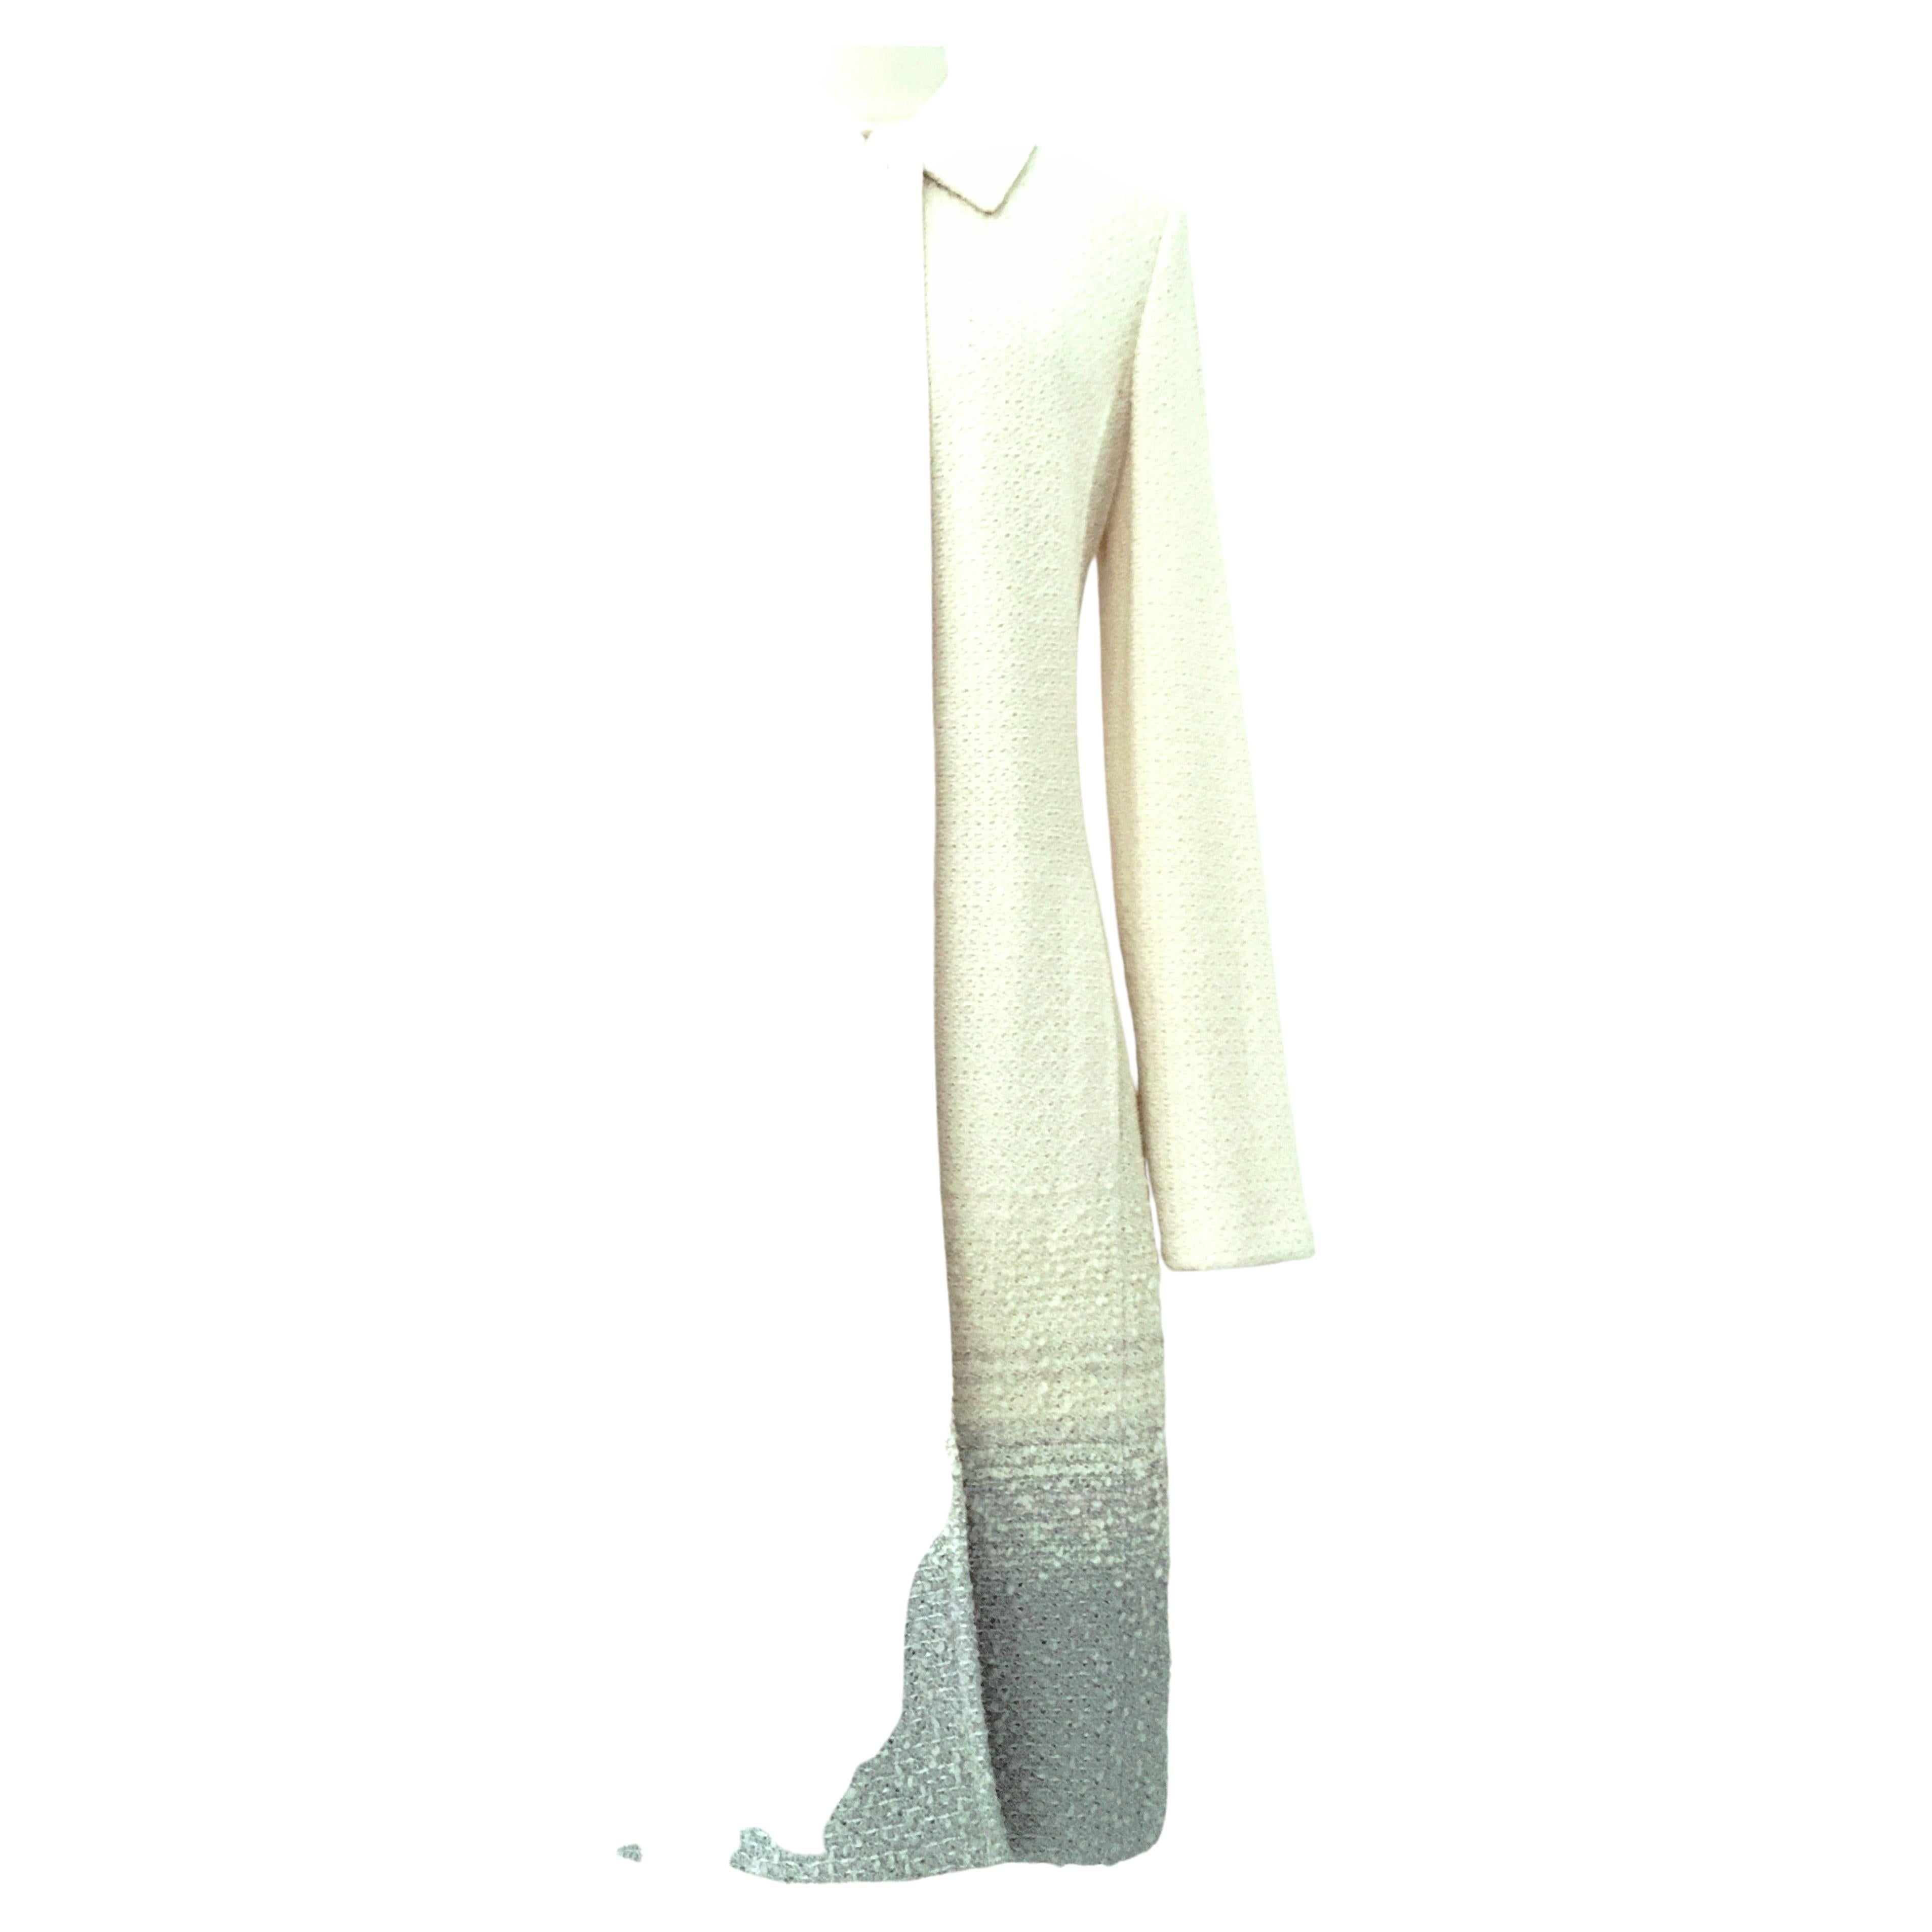 21st Century & New St. John Couture Knit Ombre Jacket Size 6. This winter white Couture wool boucle piece features a winter white to metallic silver ombre color palette. There is one single button closure at the neck as well as an additional new